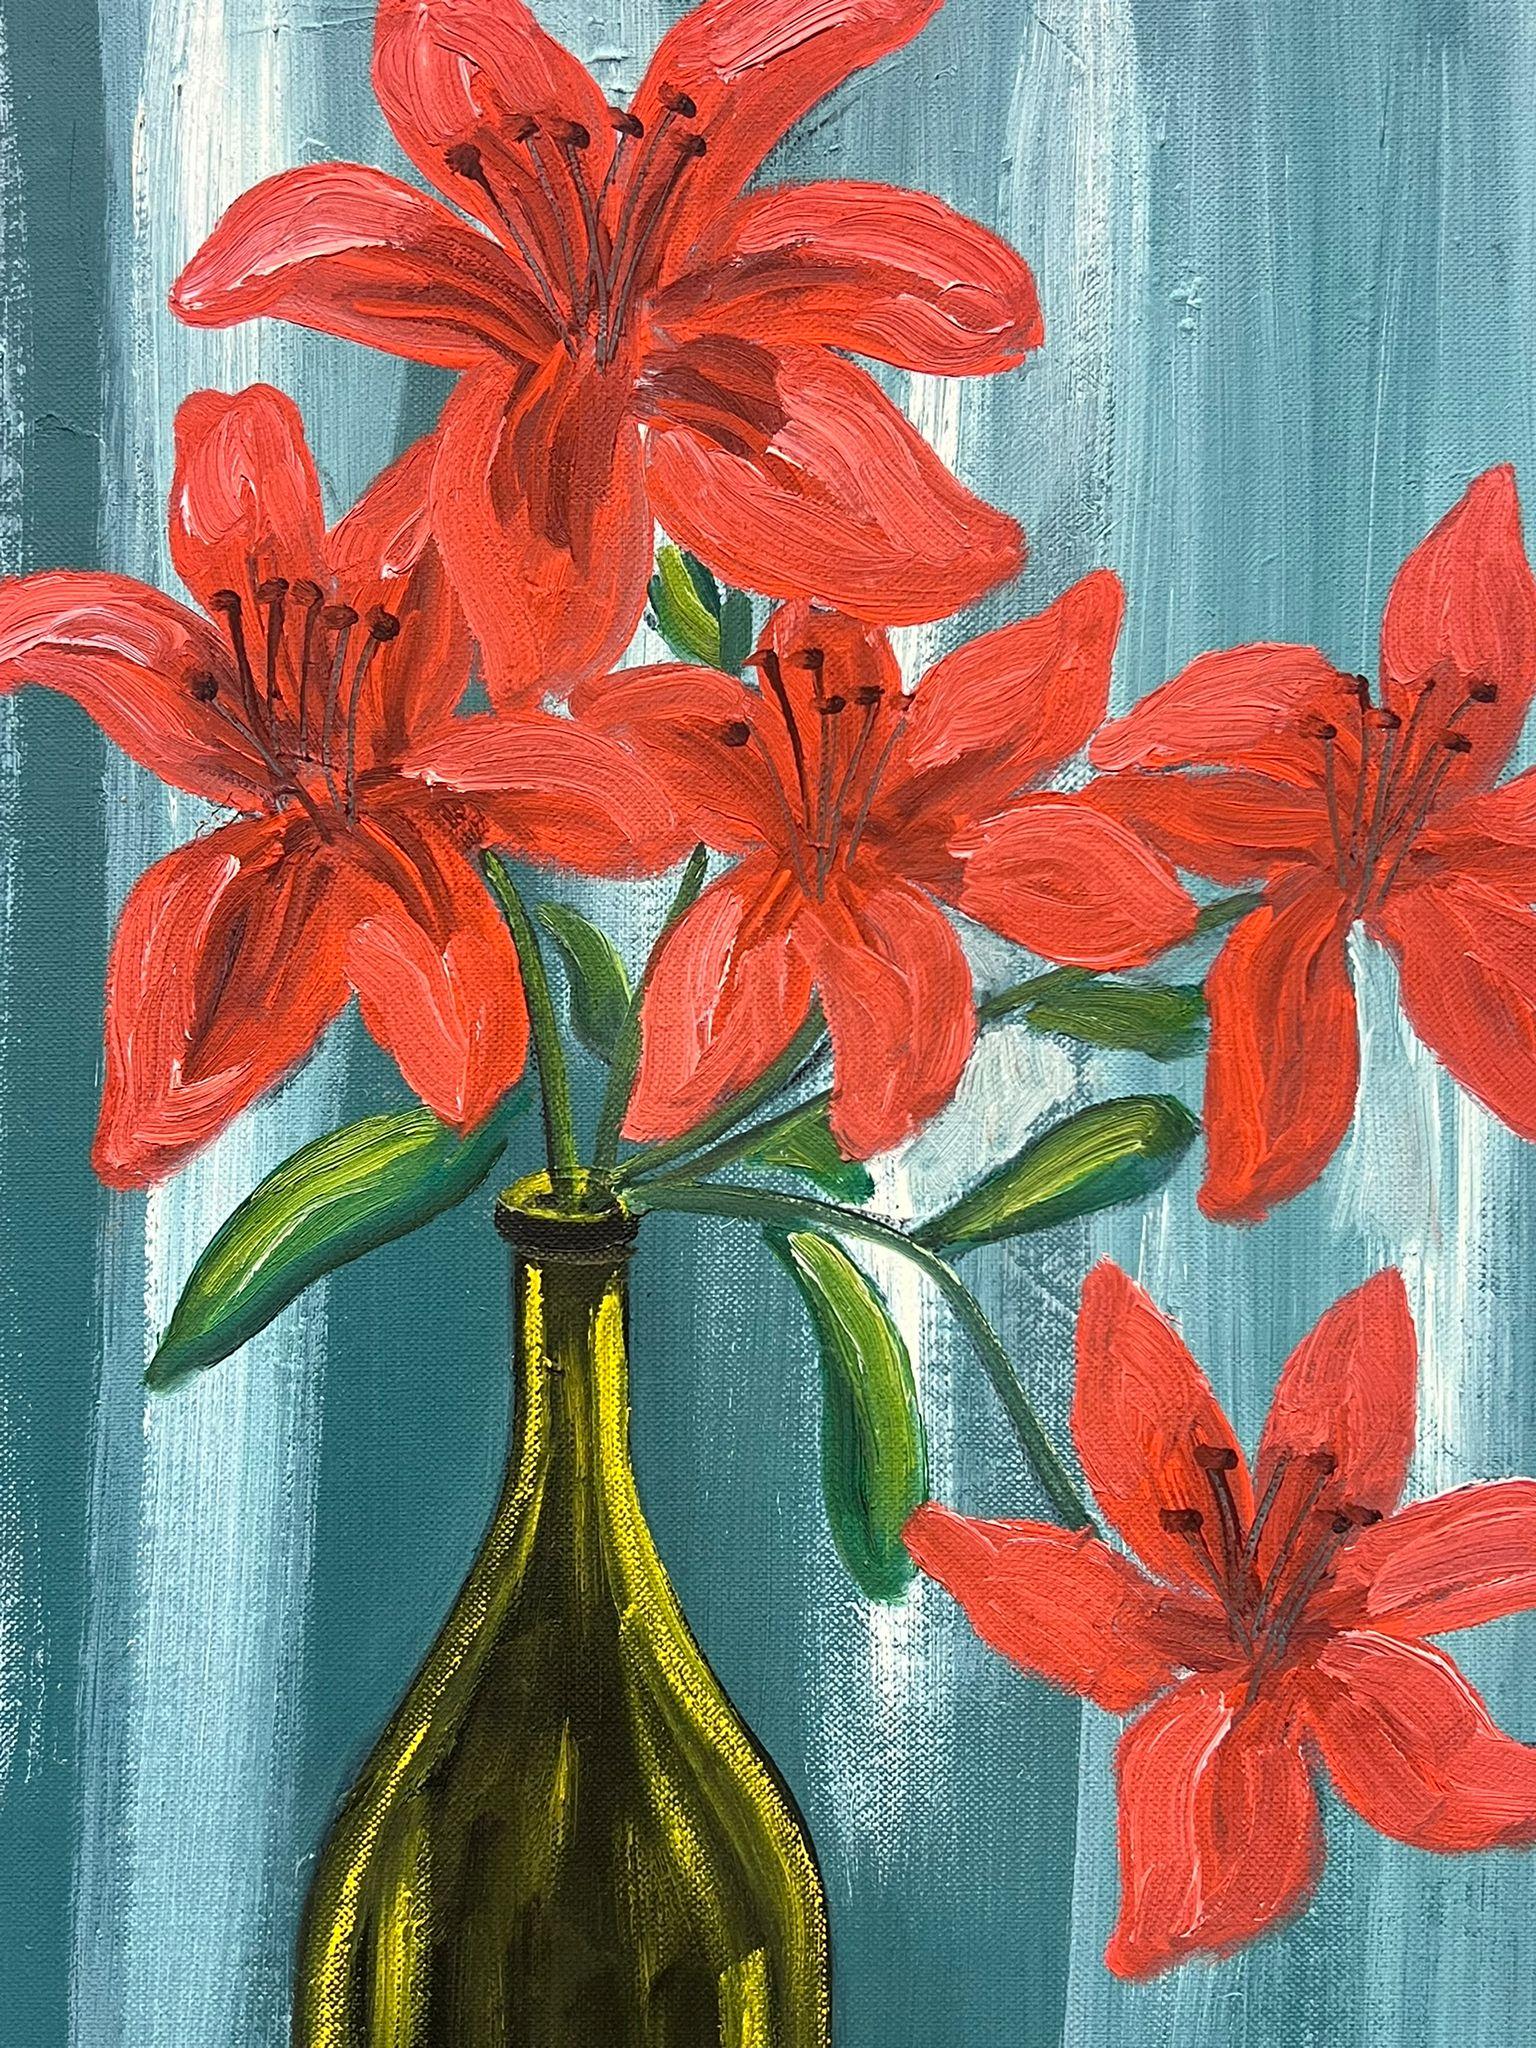 Red Lilies
by Louise Alix (French, 1888-1980) *see notes below
provenance stamp to the back 
oil painting on board, unframed
measures: 18 high by 13 inches wide
condition: overall very good and sound, a few scuffs and marks to the surface and wear